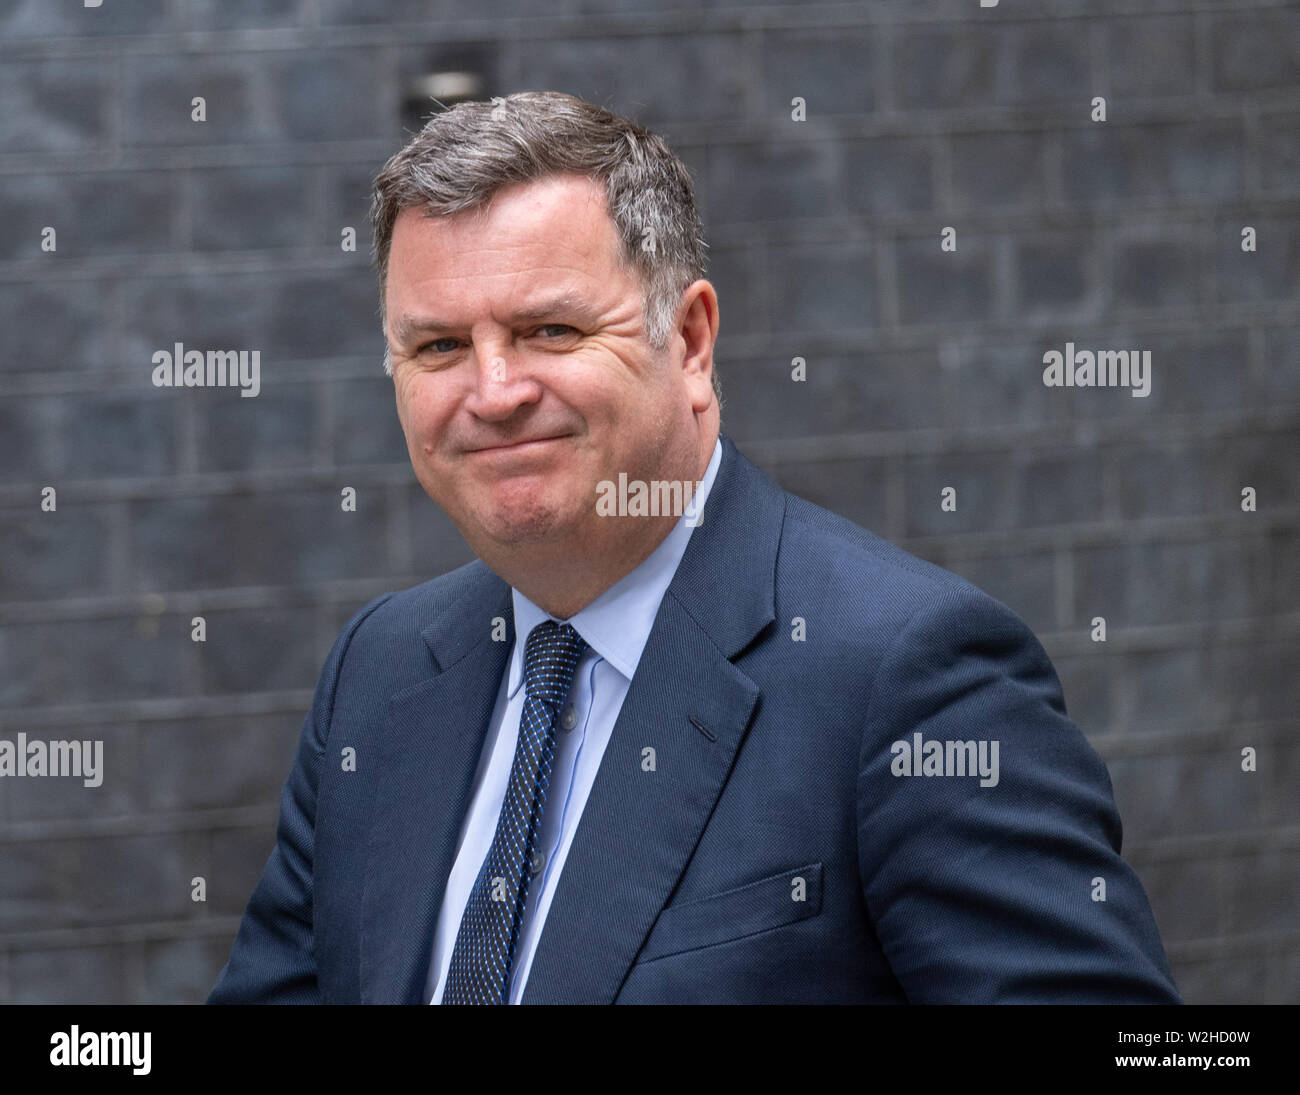 London, UK. 9th July 2019,  Mel Stride Leader of the House of Commons arrives at a Cabinet meeting at 10 Downing Street, London Credit Ian Davidson/Alamy Live News Stock Photo